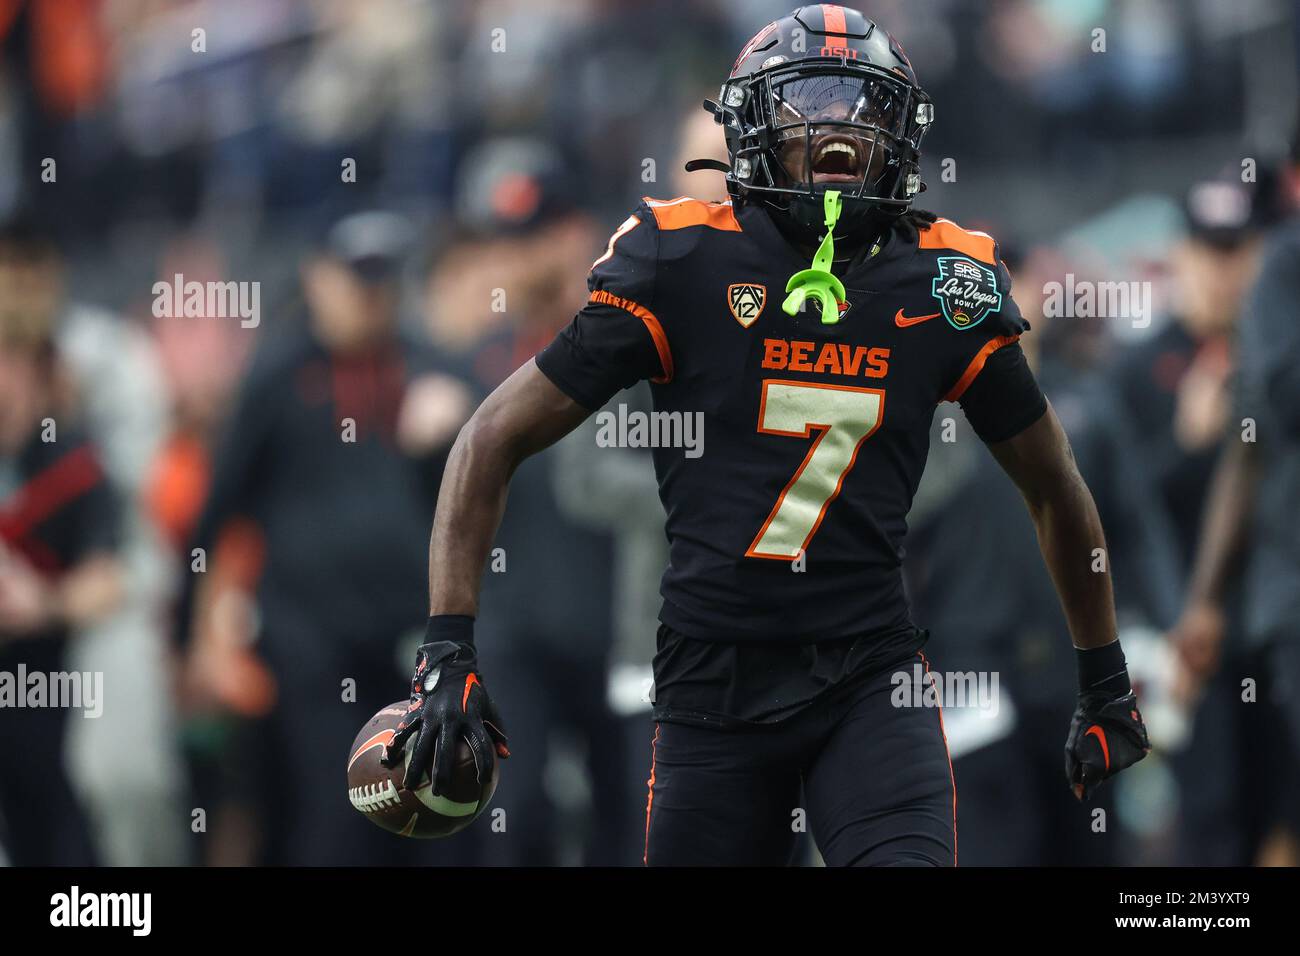 Las Vegas, NV, USA. 17th Dec, 2022. Oregon State Beavers wide receiver Silas Bolden (7) celebrates after catching the football during the first half of the SRS Distribution Las Vegas Bowl featuring the Florida Gators and the Oregon State Beavers at Allegiant Stadium in Las Vegas, NV. Christopher Trim/CSM/Alamy Live News Stock Photo